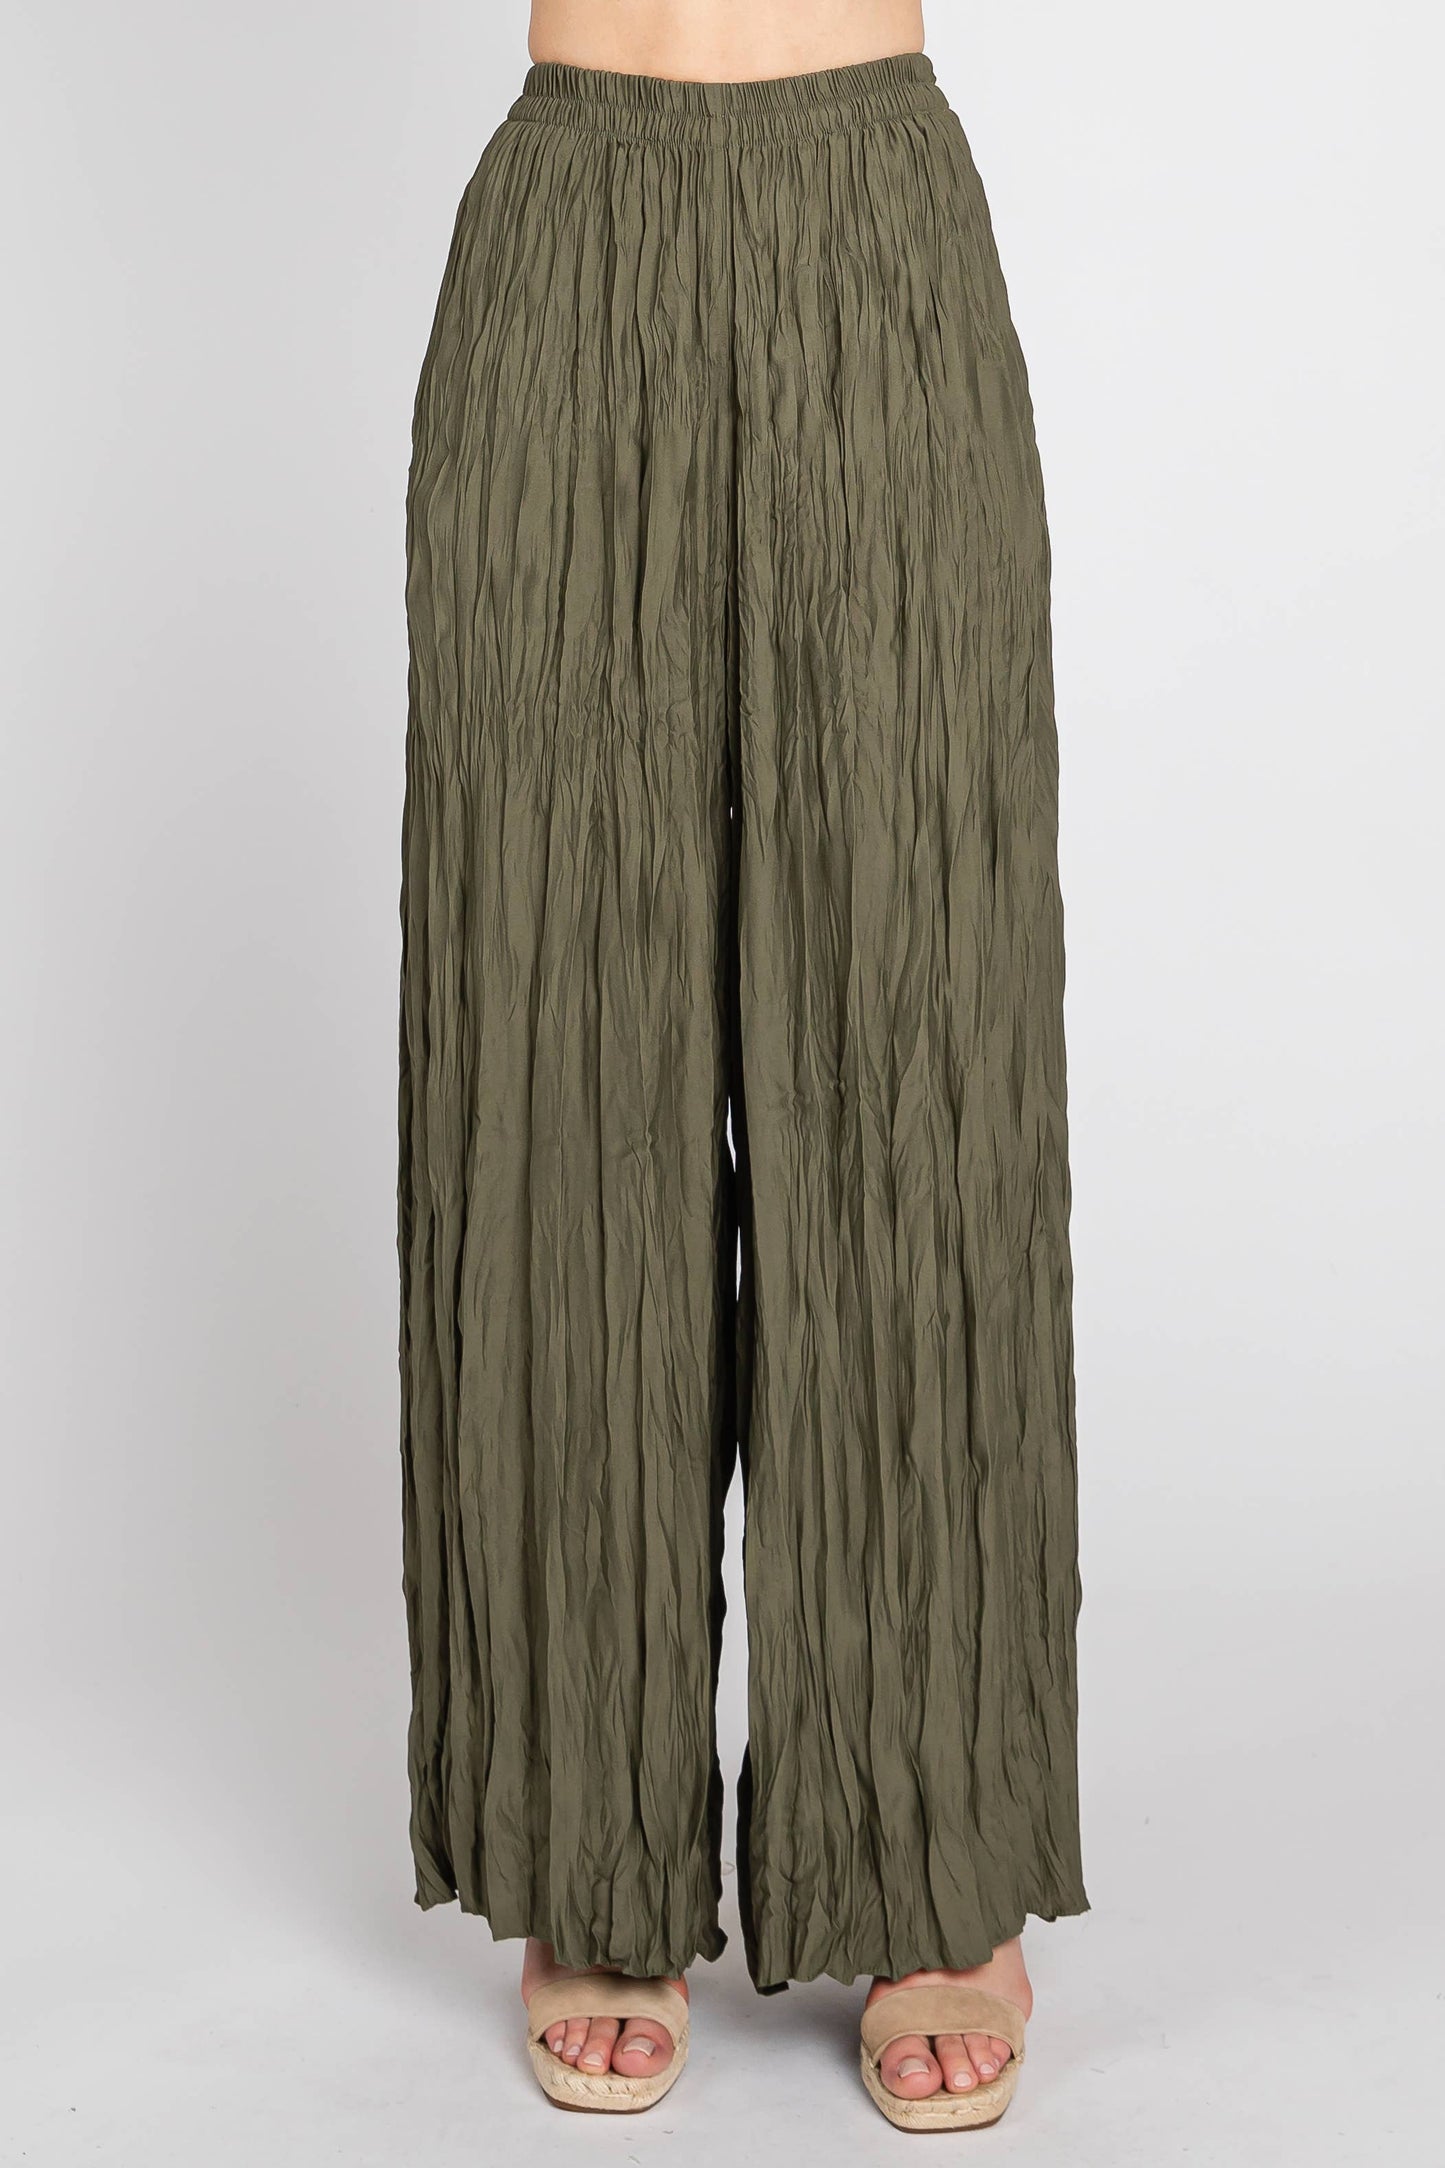 Broomstick Palazzo Pants in Classic Olive